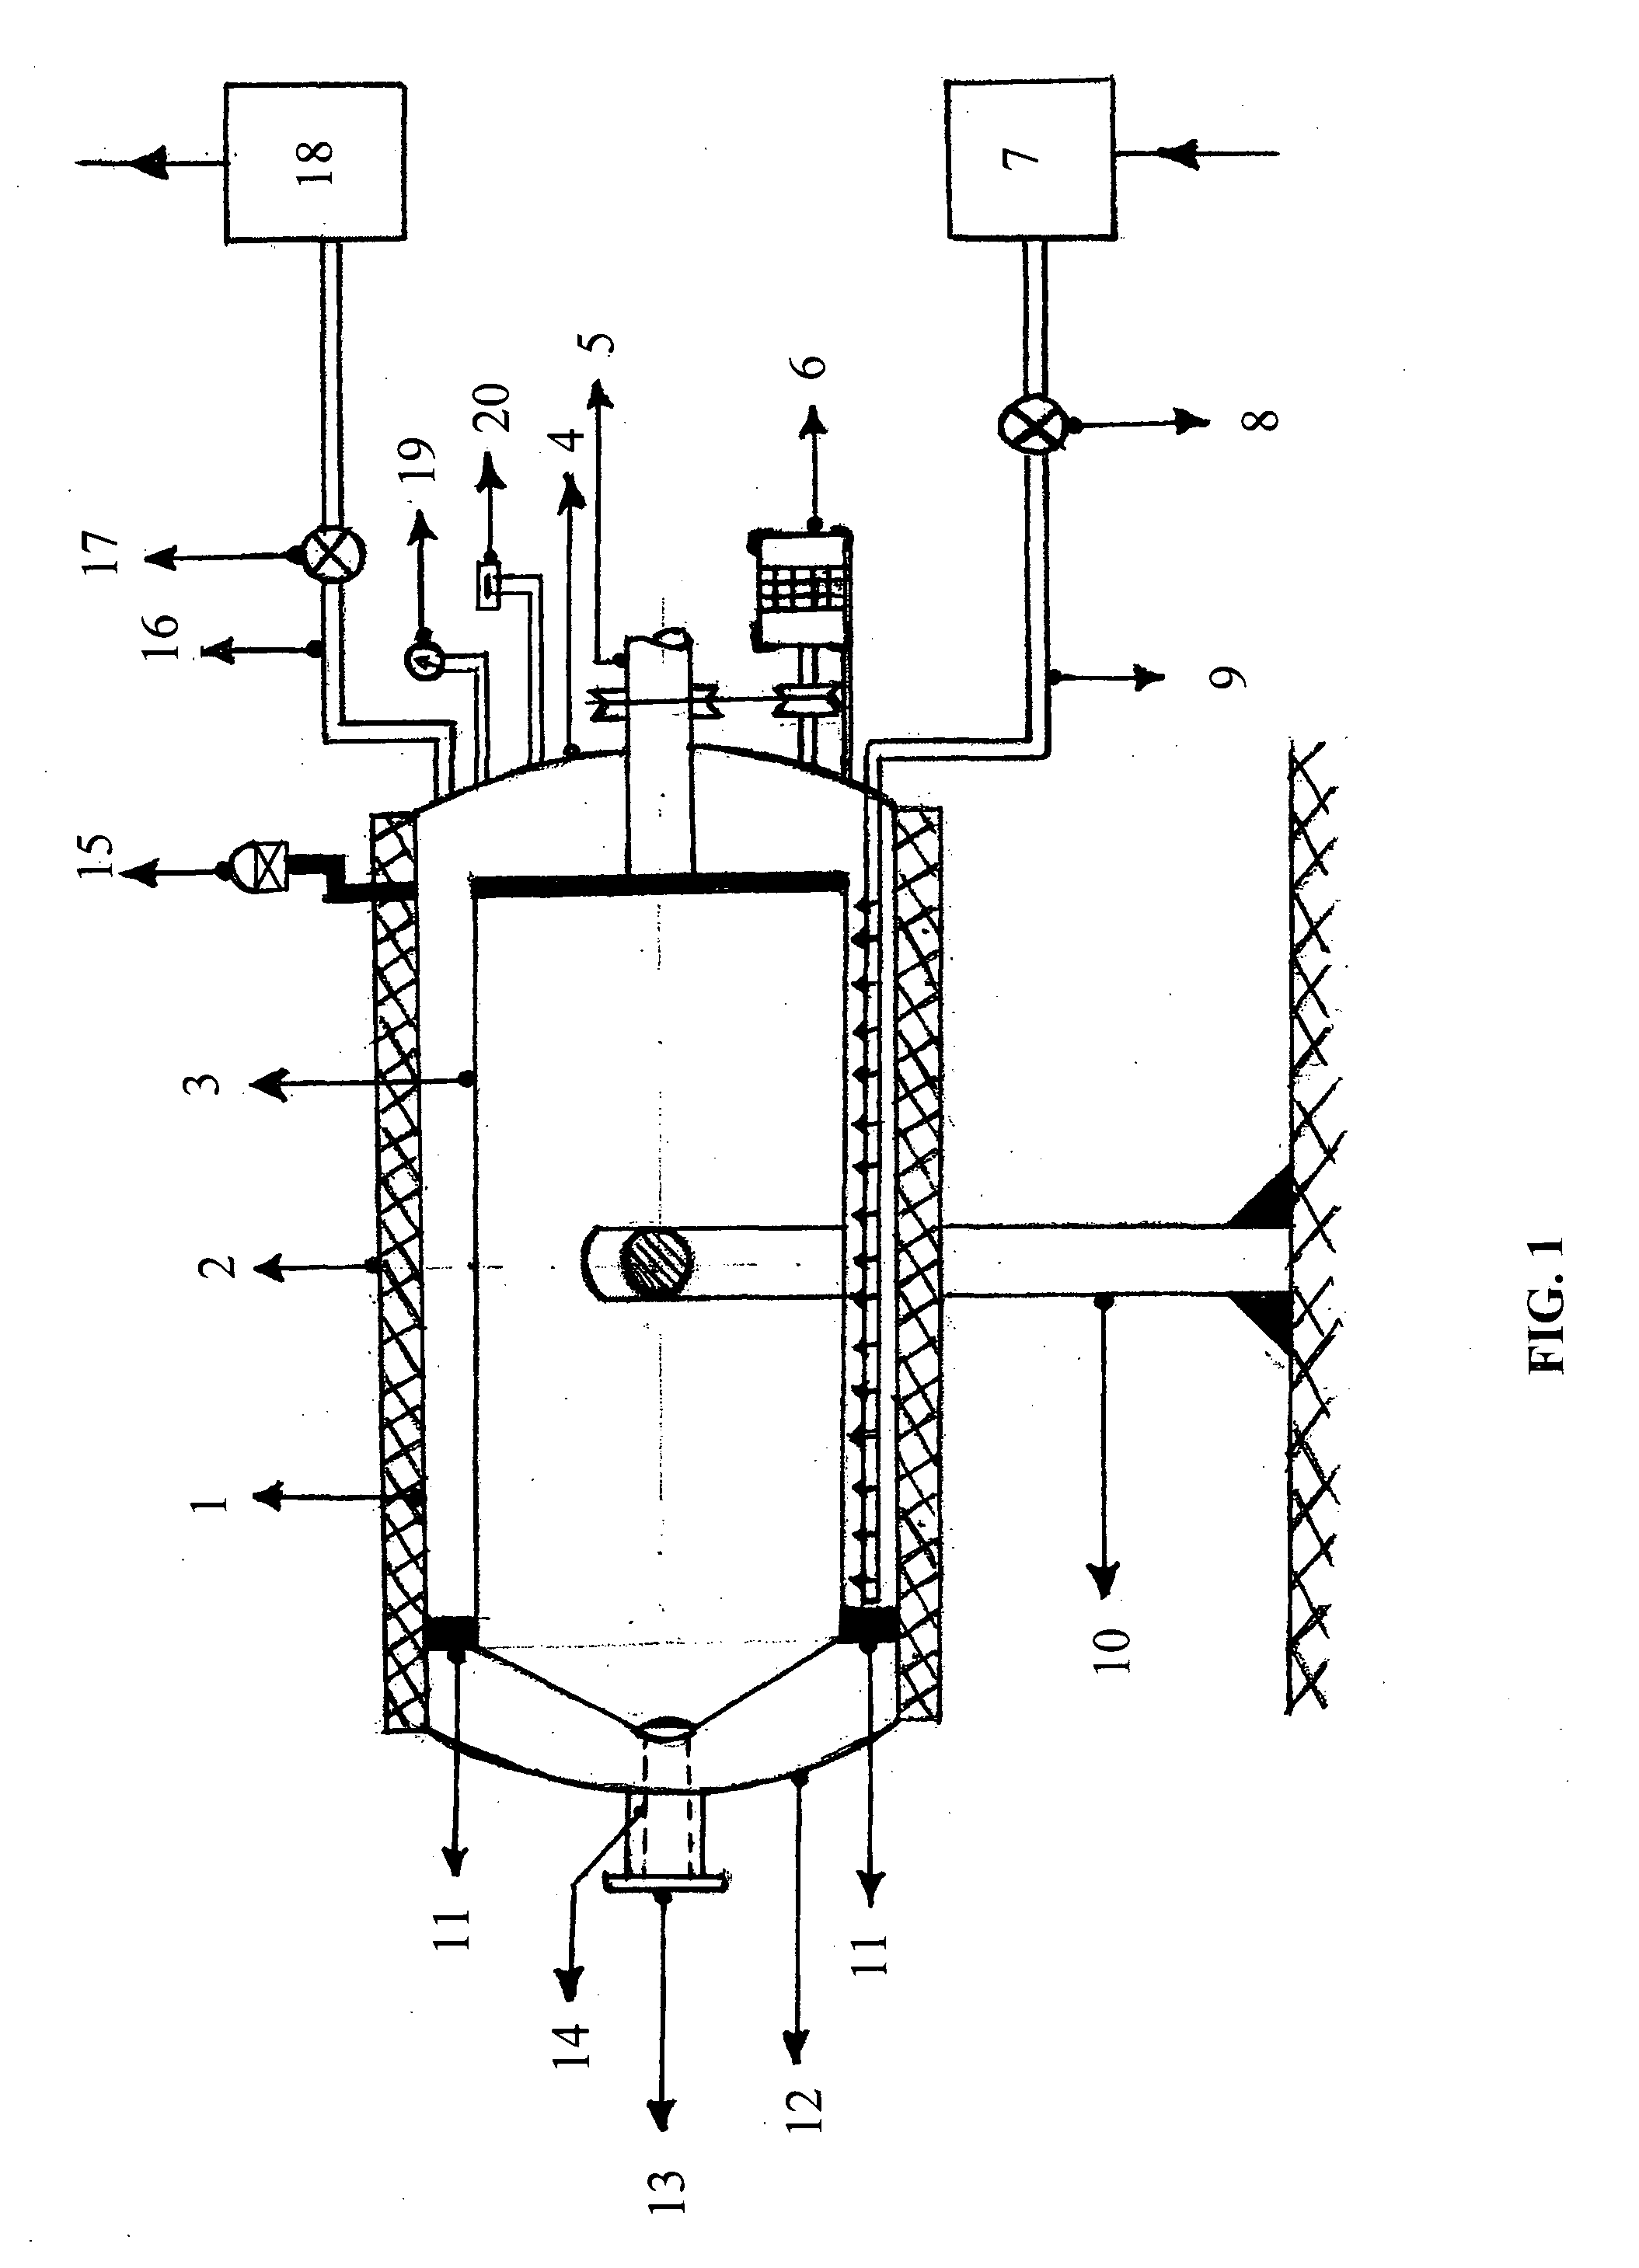 Process and an apparatus for converting solid organic materials into carbon or activated carbon